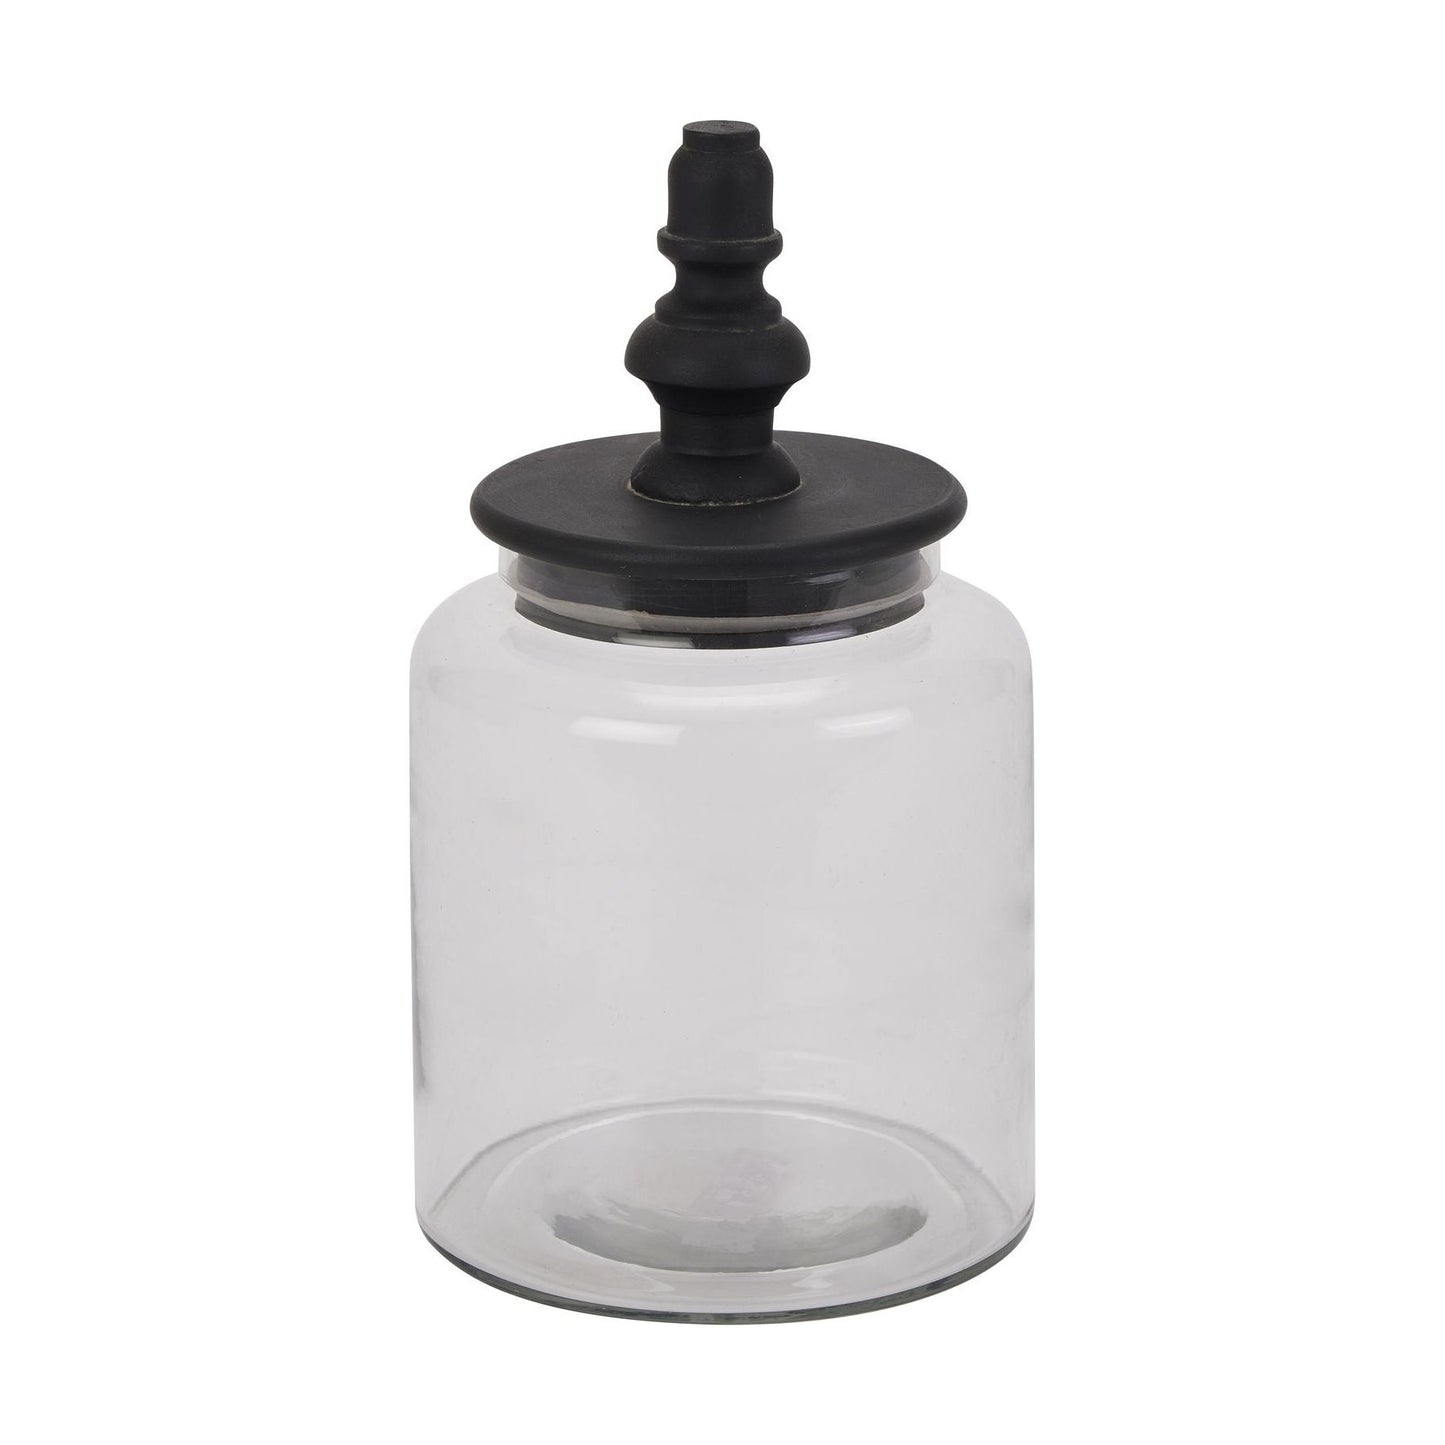 Black Finial Glass Canister - Ashton and Finch